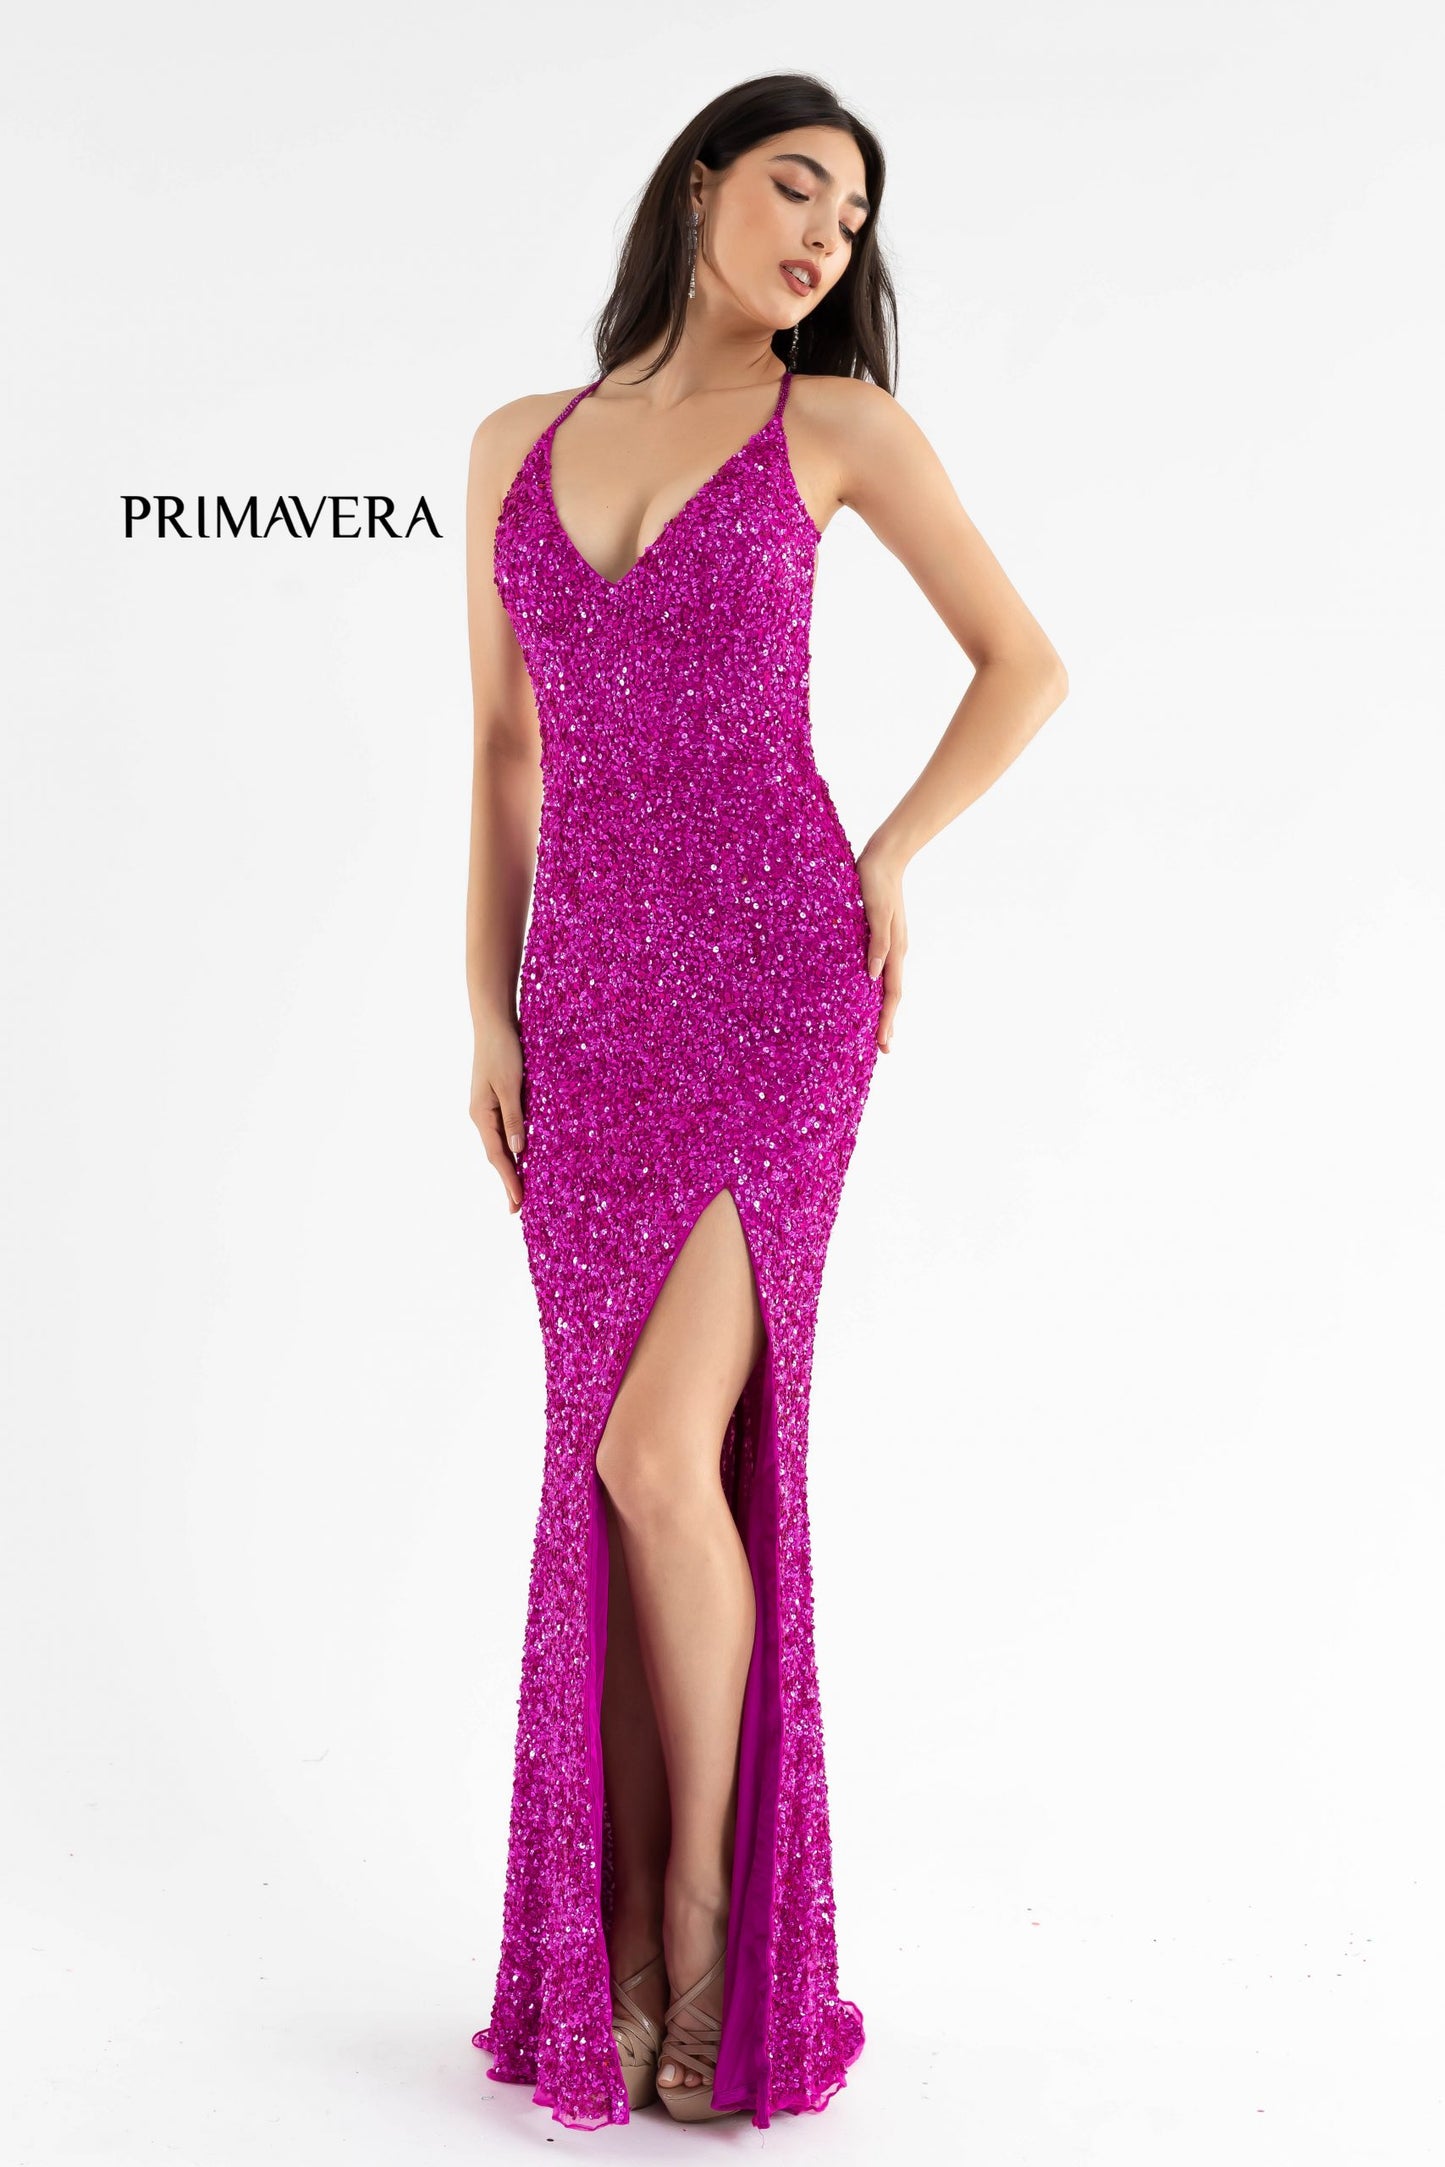 Primavera Couture 3291 Exclusive Prom Dresses.  This long prom dress is embellished throughout with shimmering sequins.  This impressive gown showcases a v neckline, thin beaded straps and crisscrossed straps in the open back. The long slim skirt has a sultry high side front slit. 